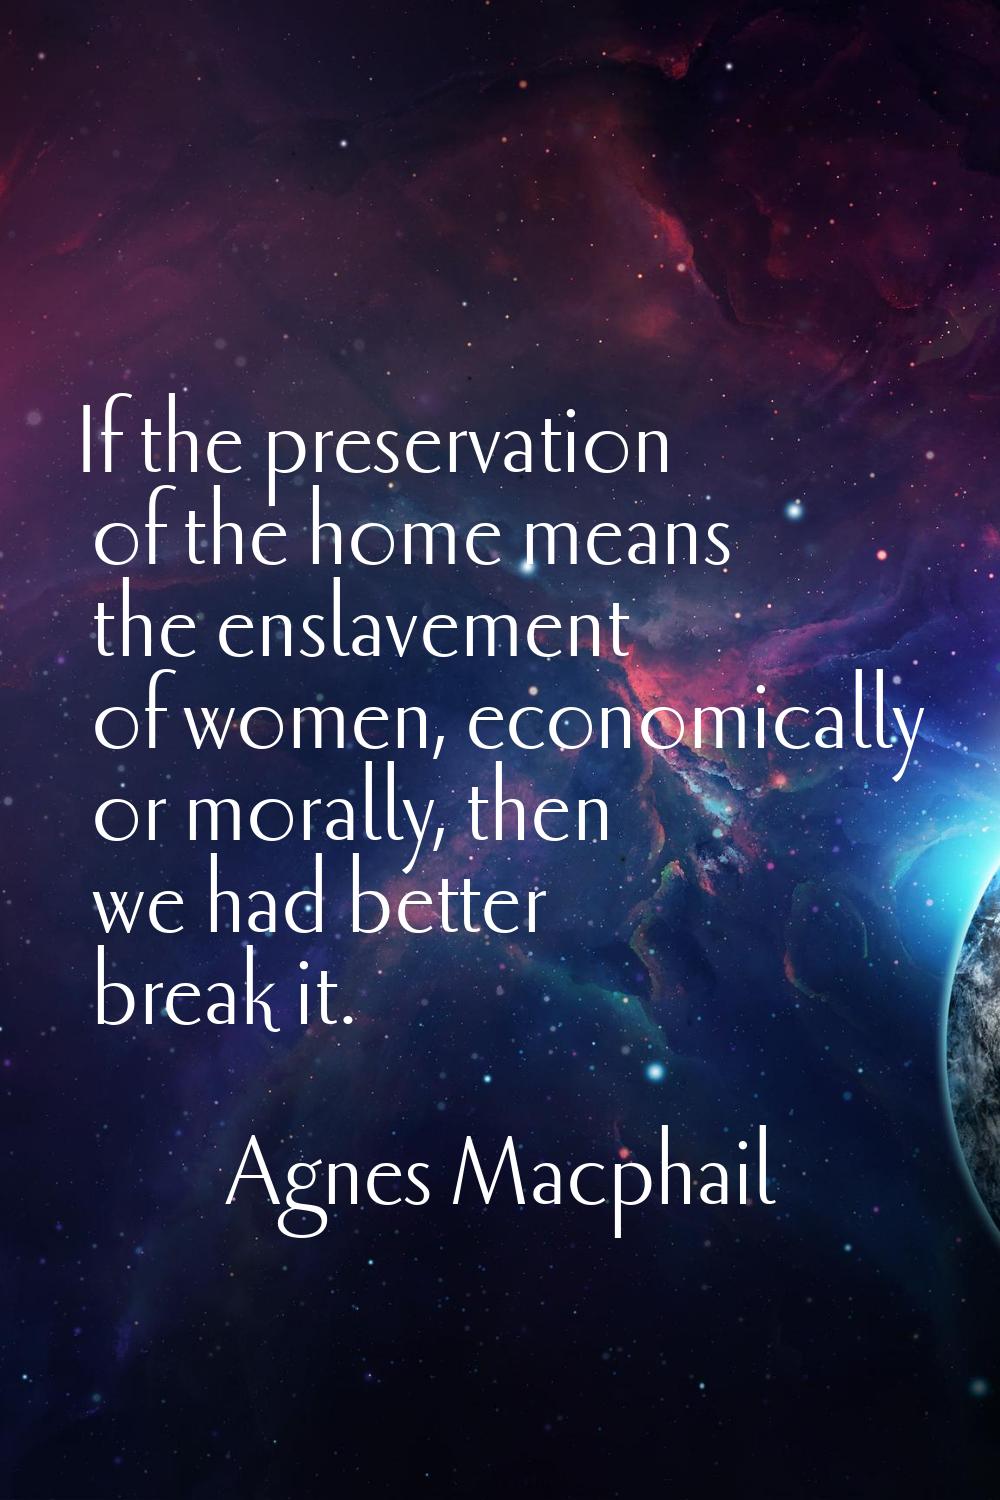 If the preservation of the home means the enslavement of women, economically or morally, then we ha